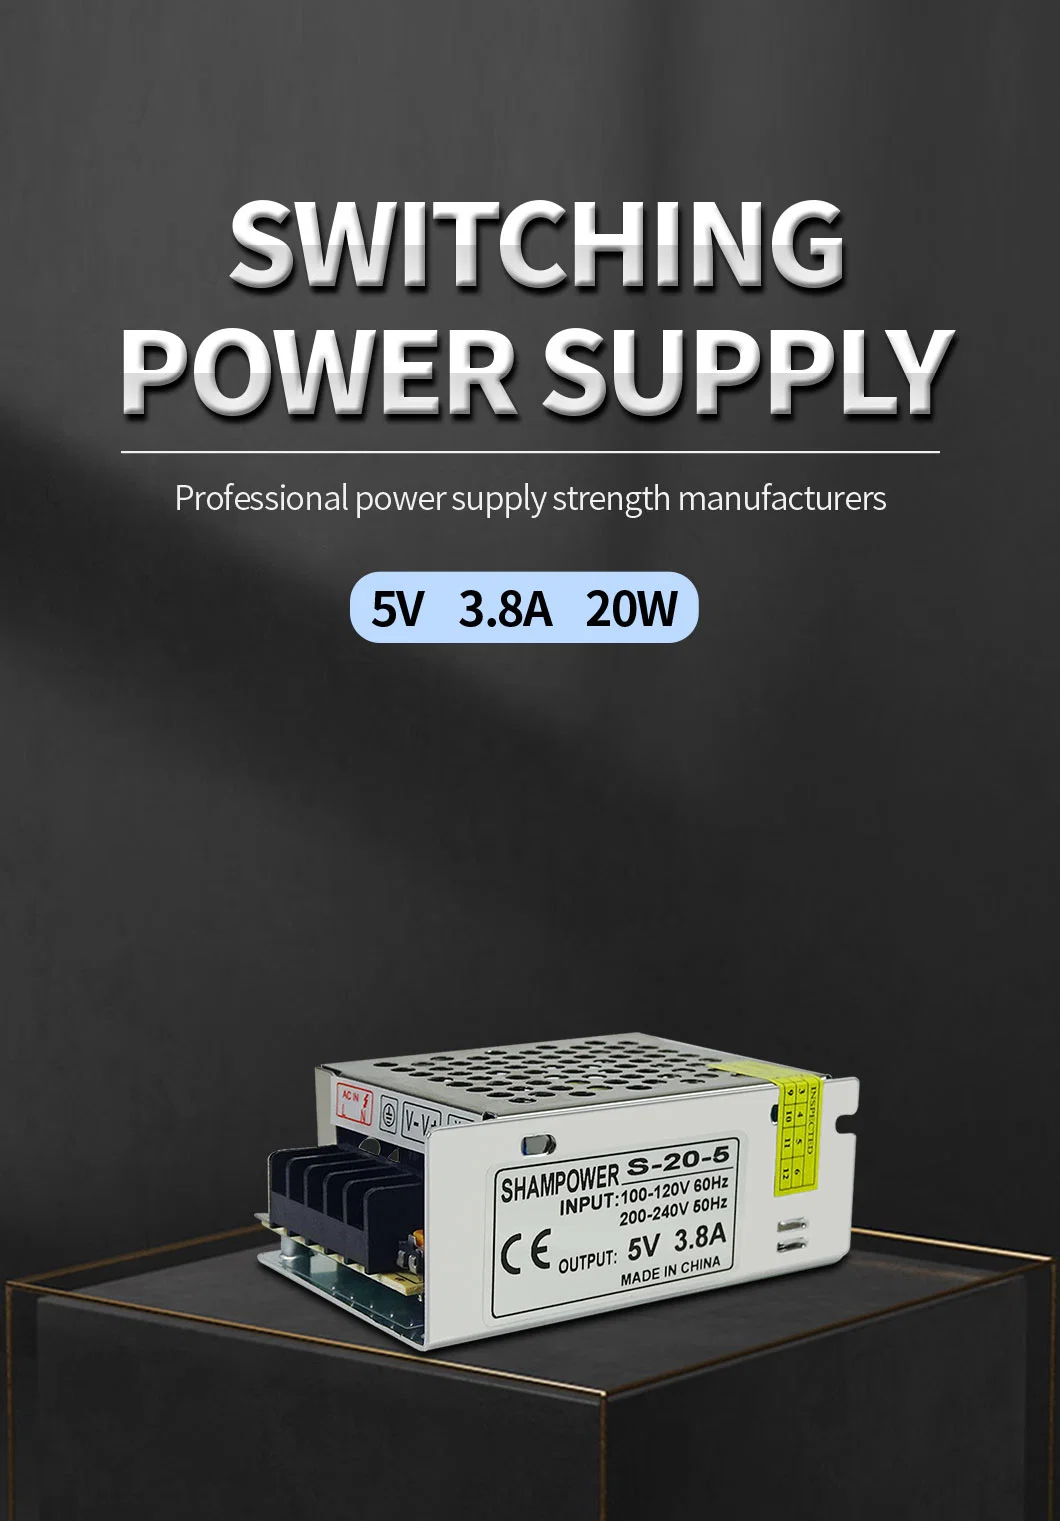 LED DC 5V 3.8A 20W Switching Power Supply for LED Display Screen